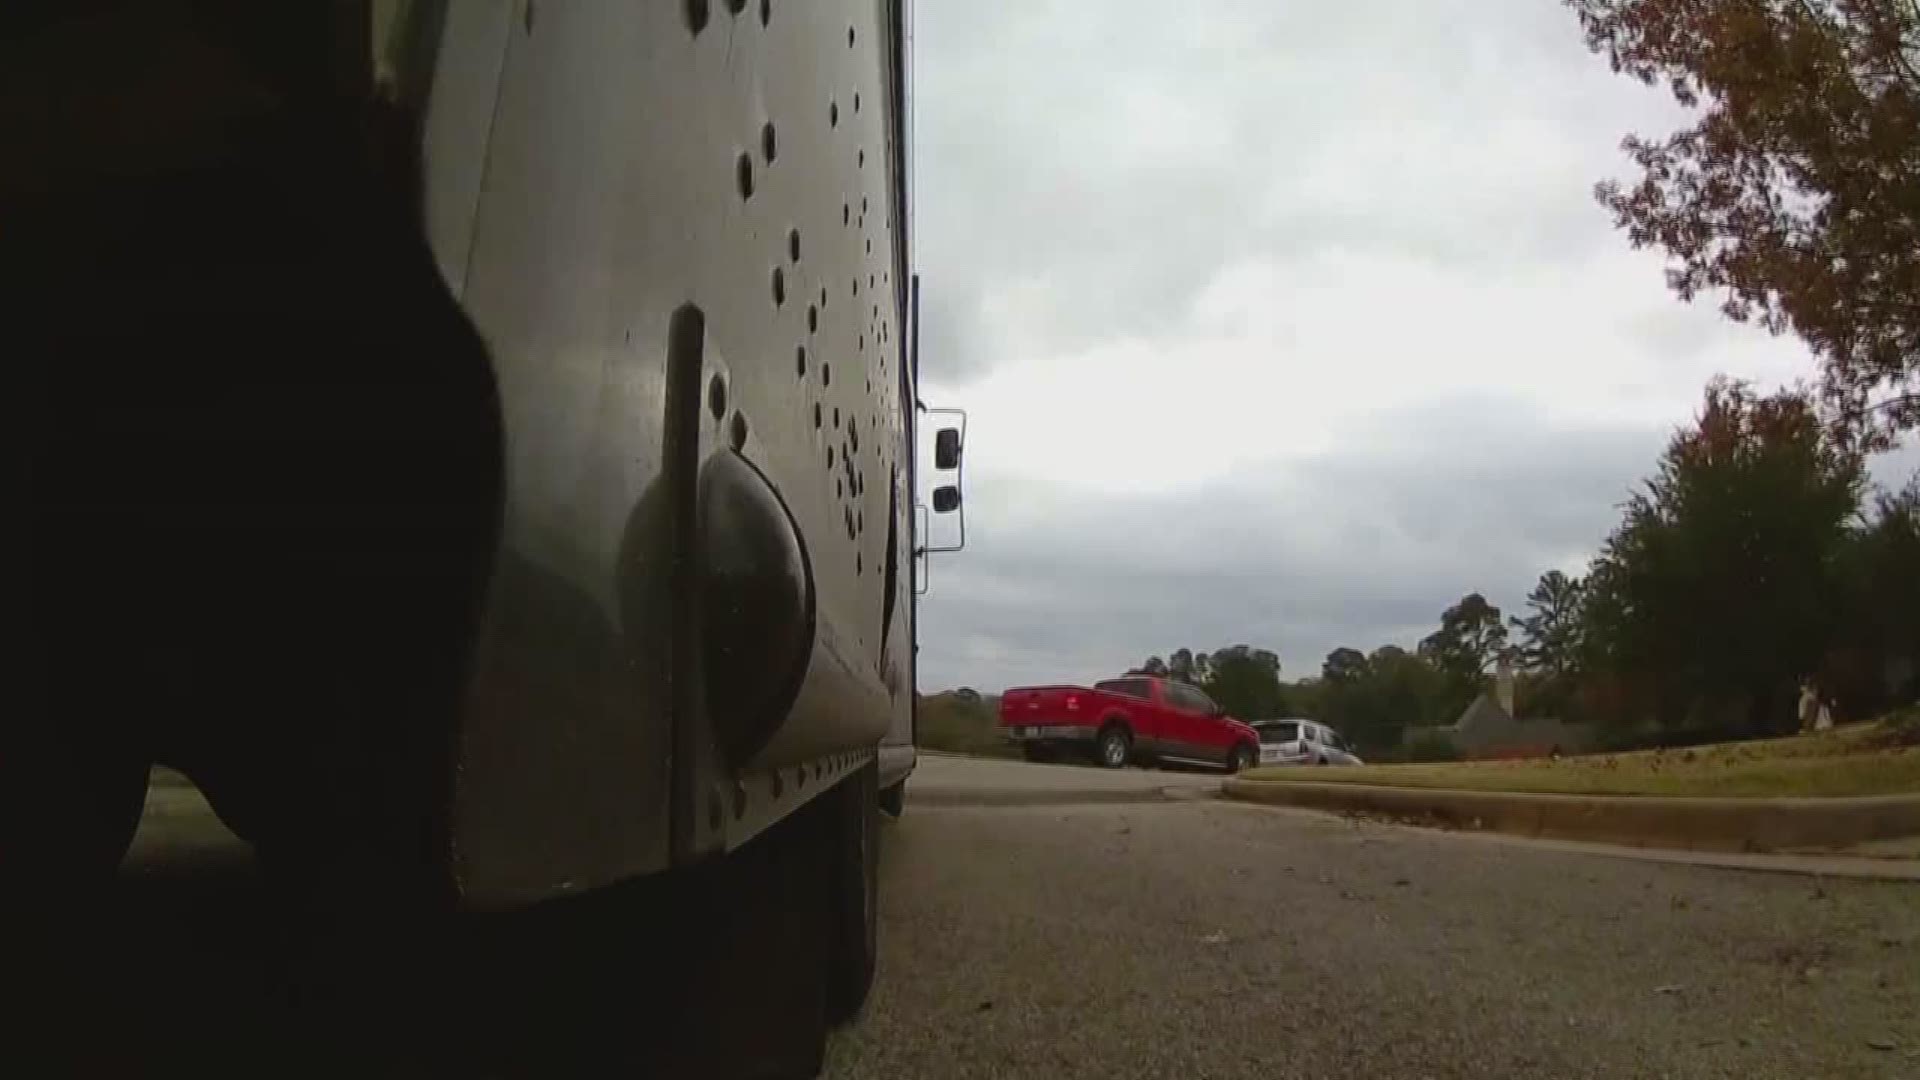 We hear from an East Texas UPS driver as he delivers packages just in time for Christmas